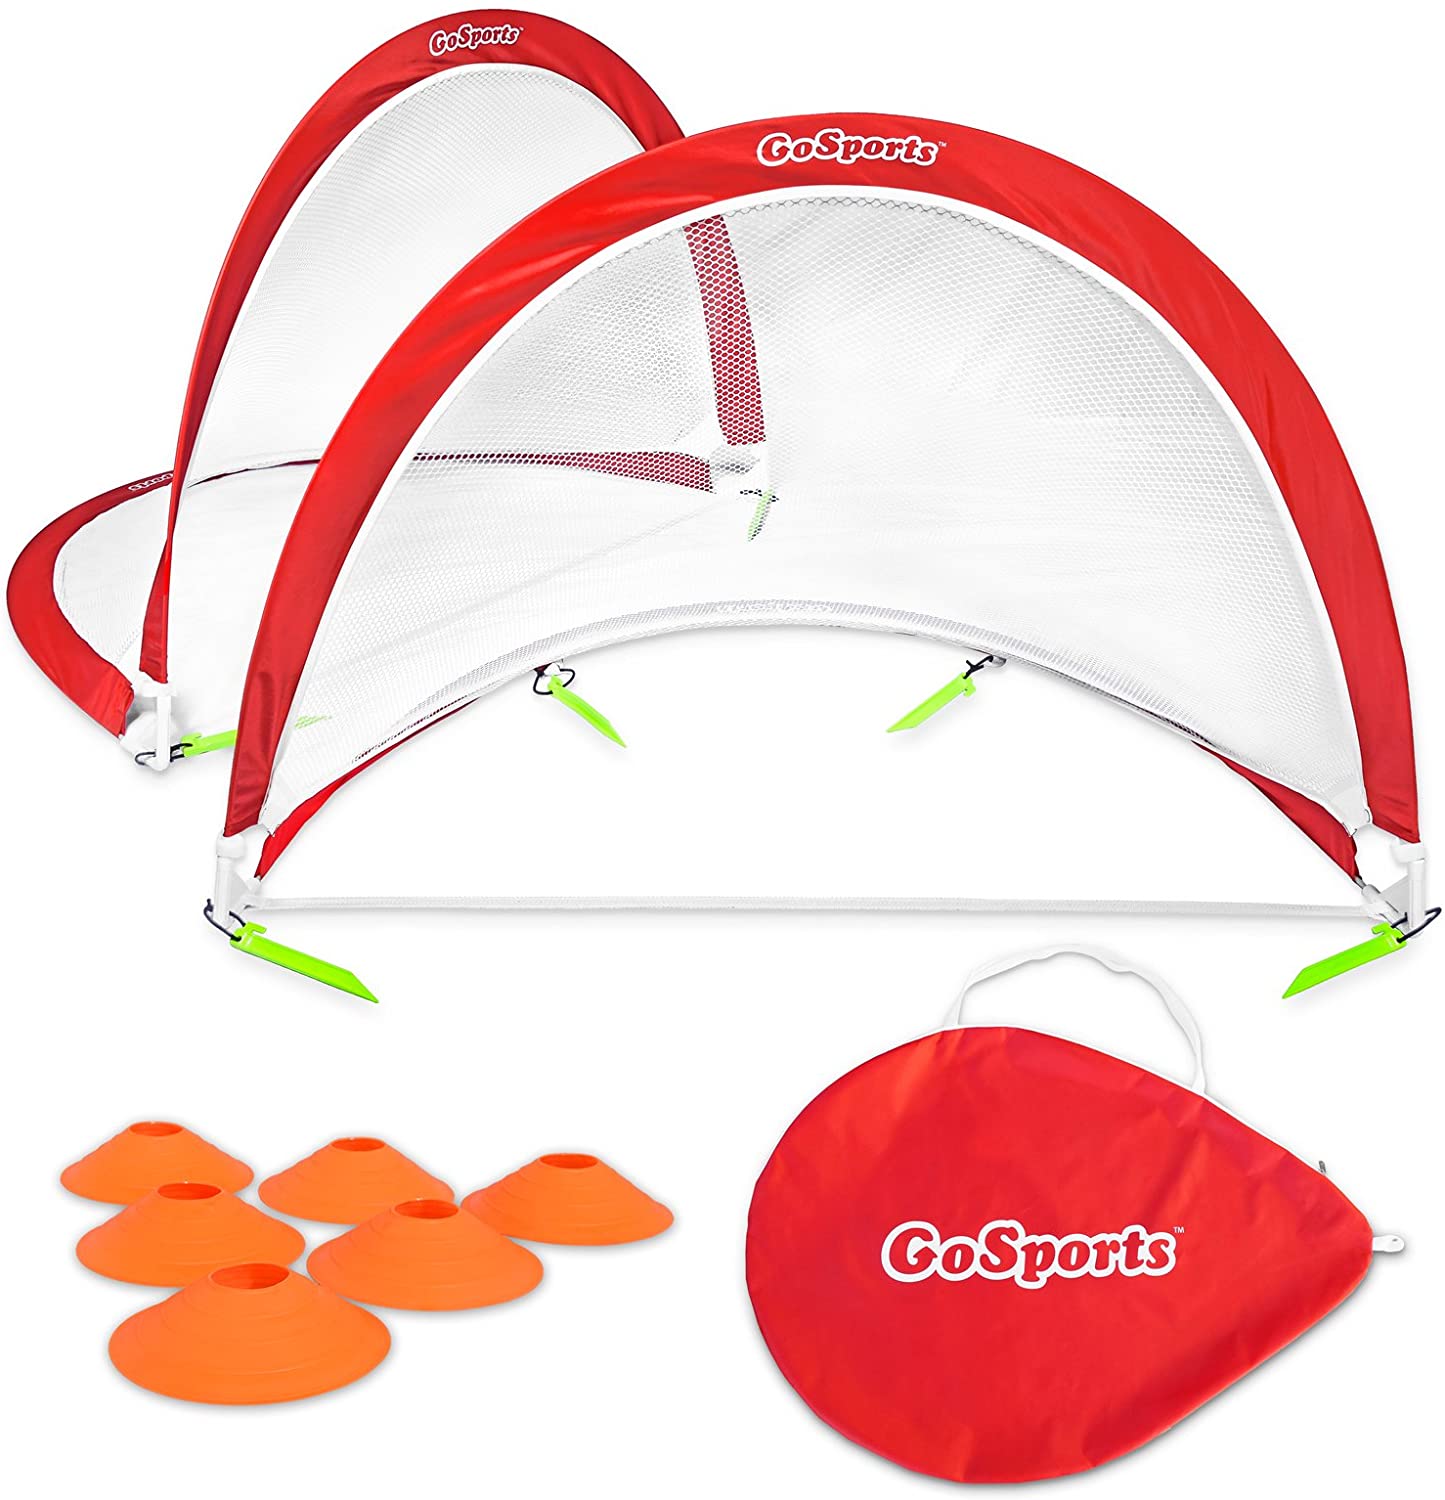 GoSports Collapsible Compact Soccer Goals, 2-Pack